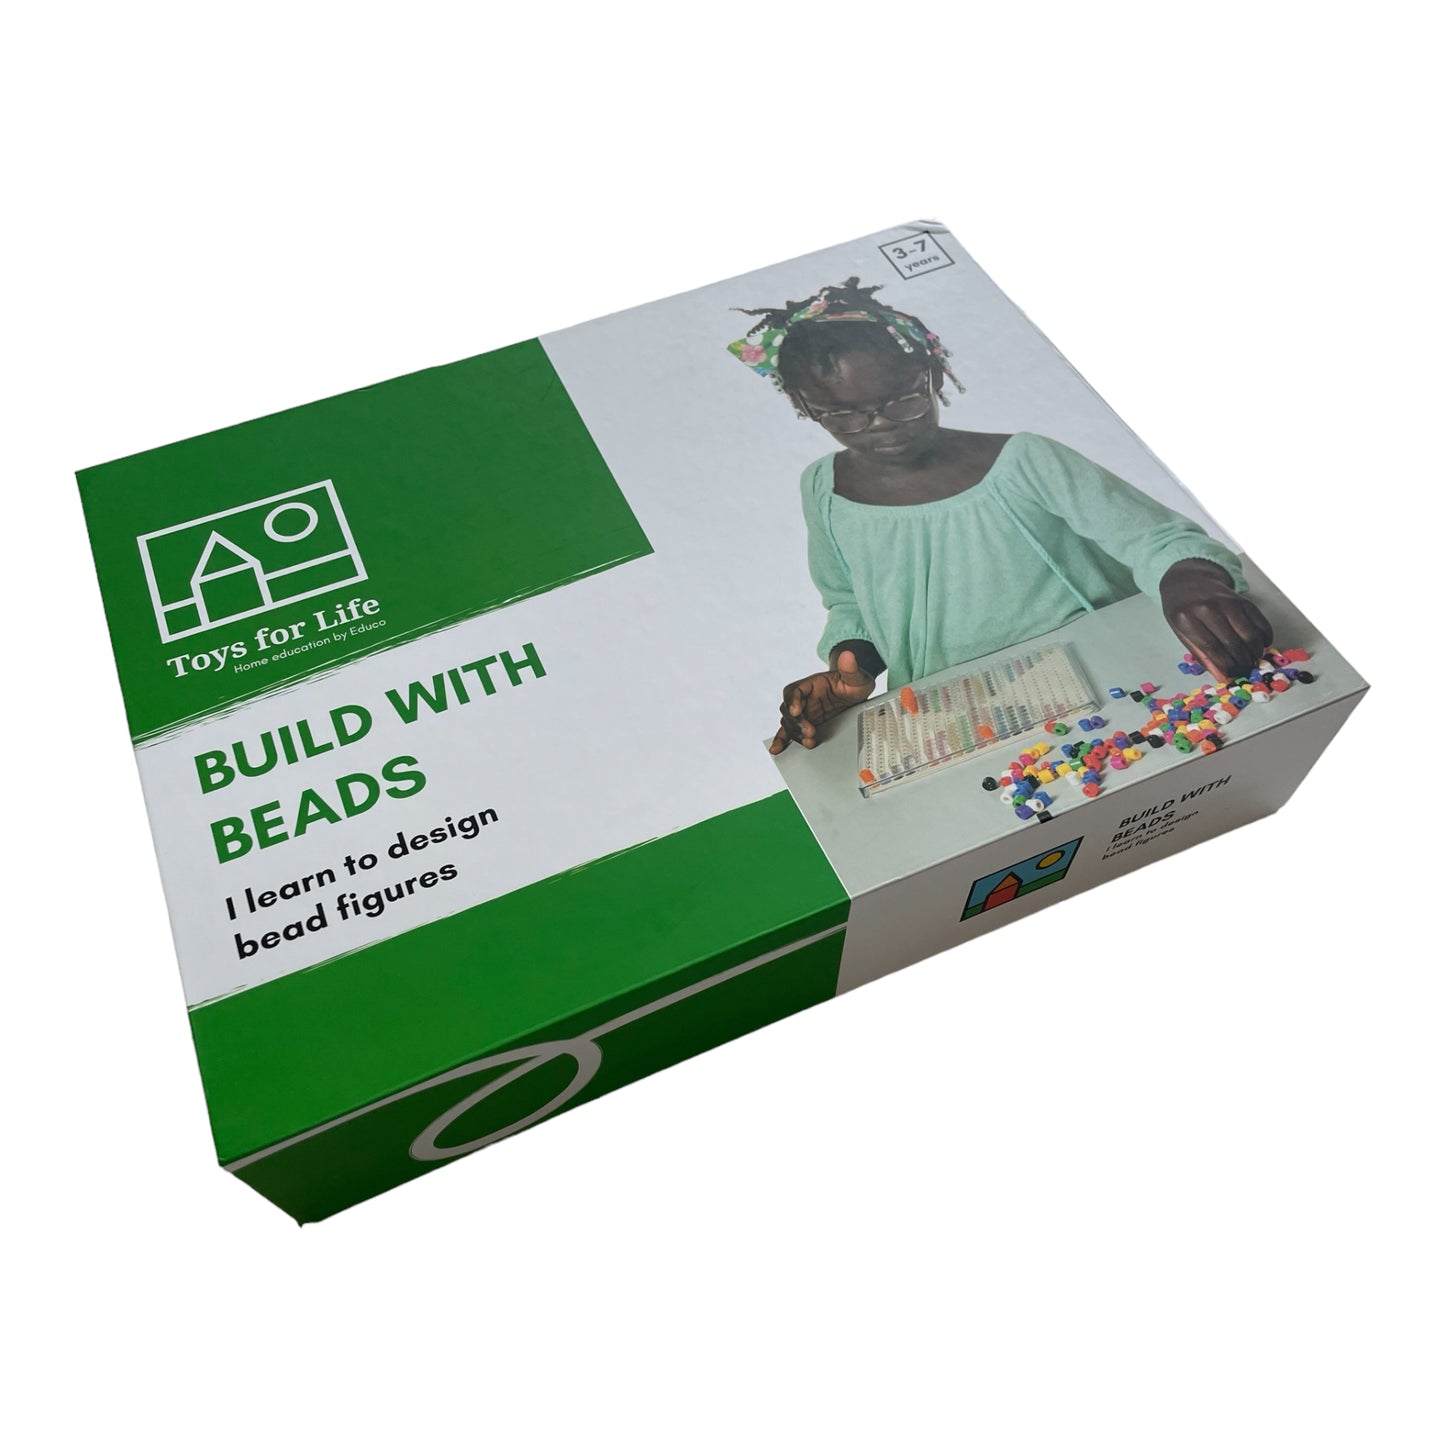 Educational Game Toys for Life - Build with Beads